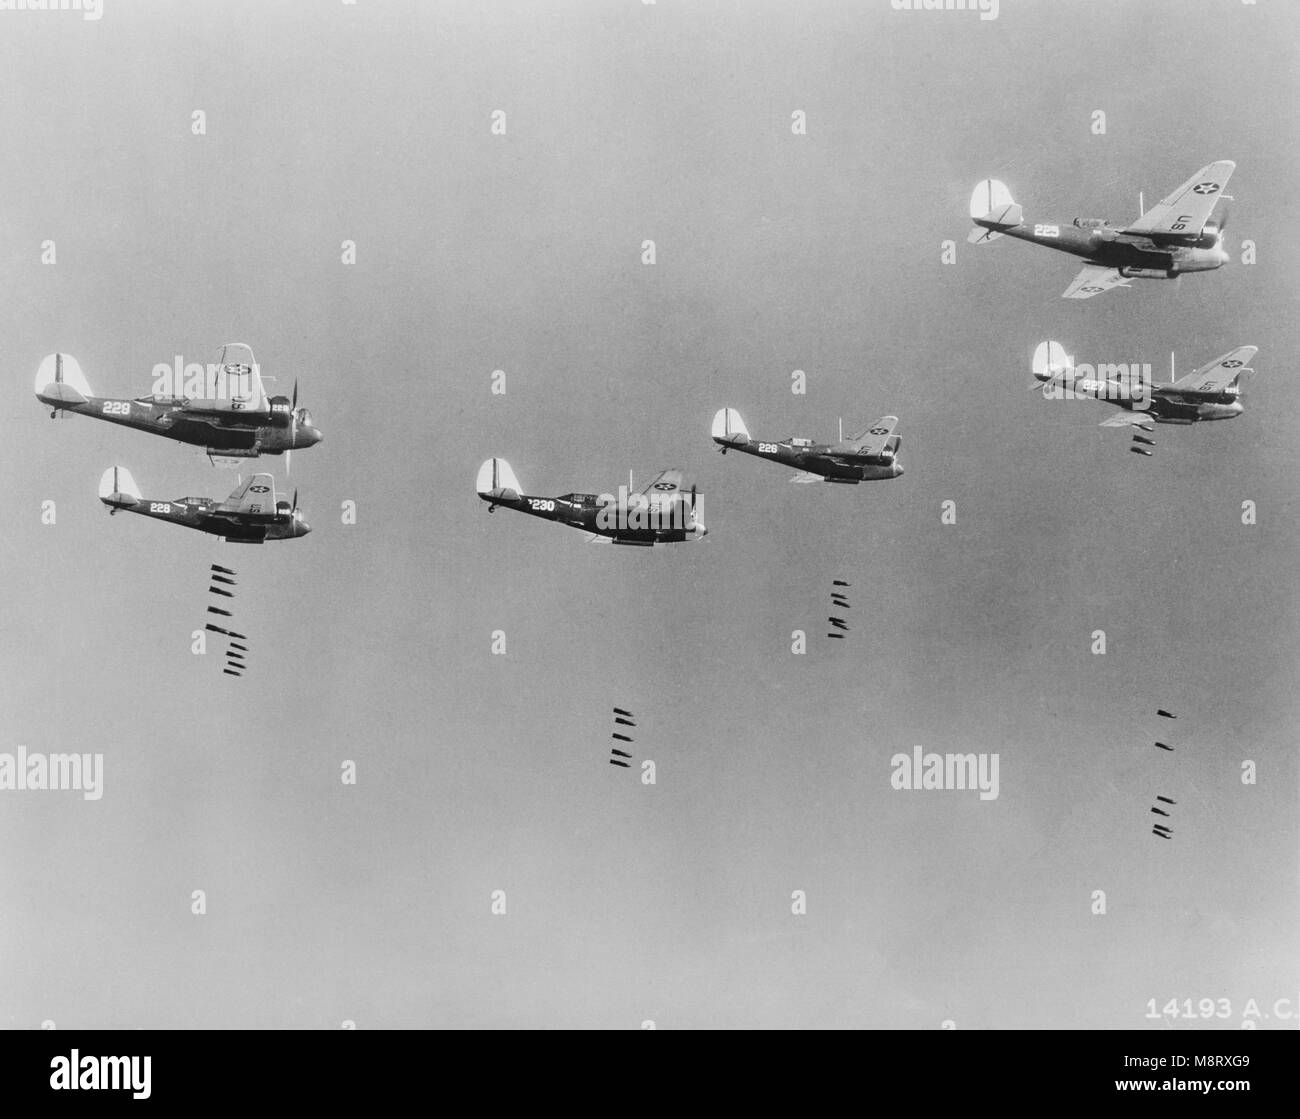 600-pound Bombs falling from Formation of B-10 Bombers in Bombing Practice by 19th Bombardment Group,  U.S. Army Air Corps, Office of War Information, early 1940's Stock Photo